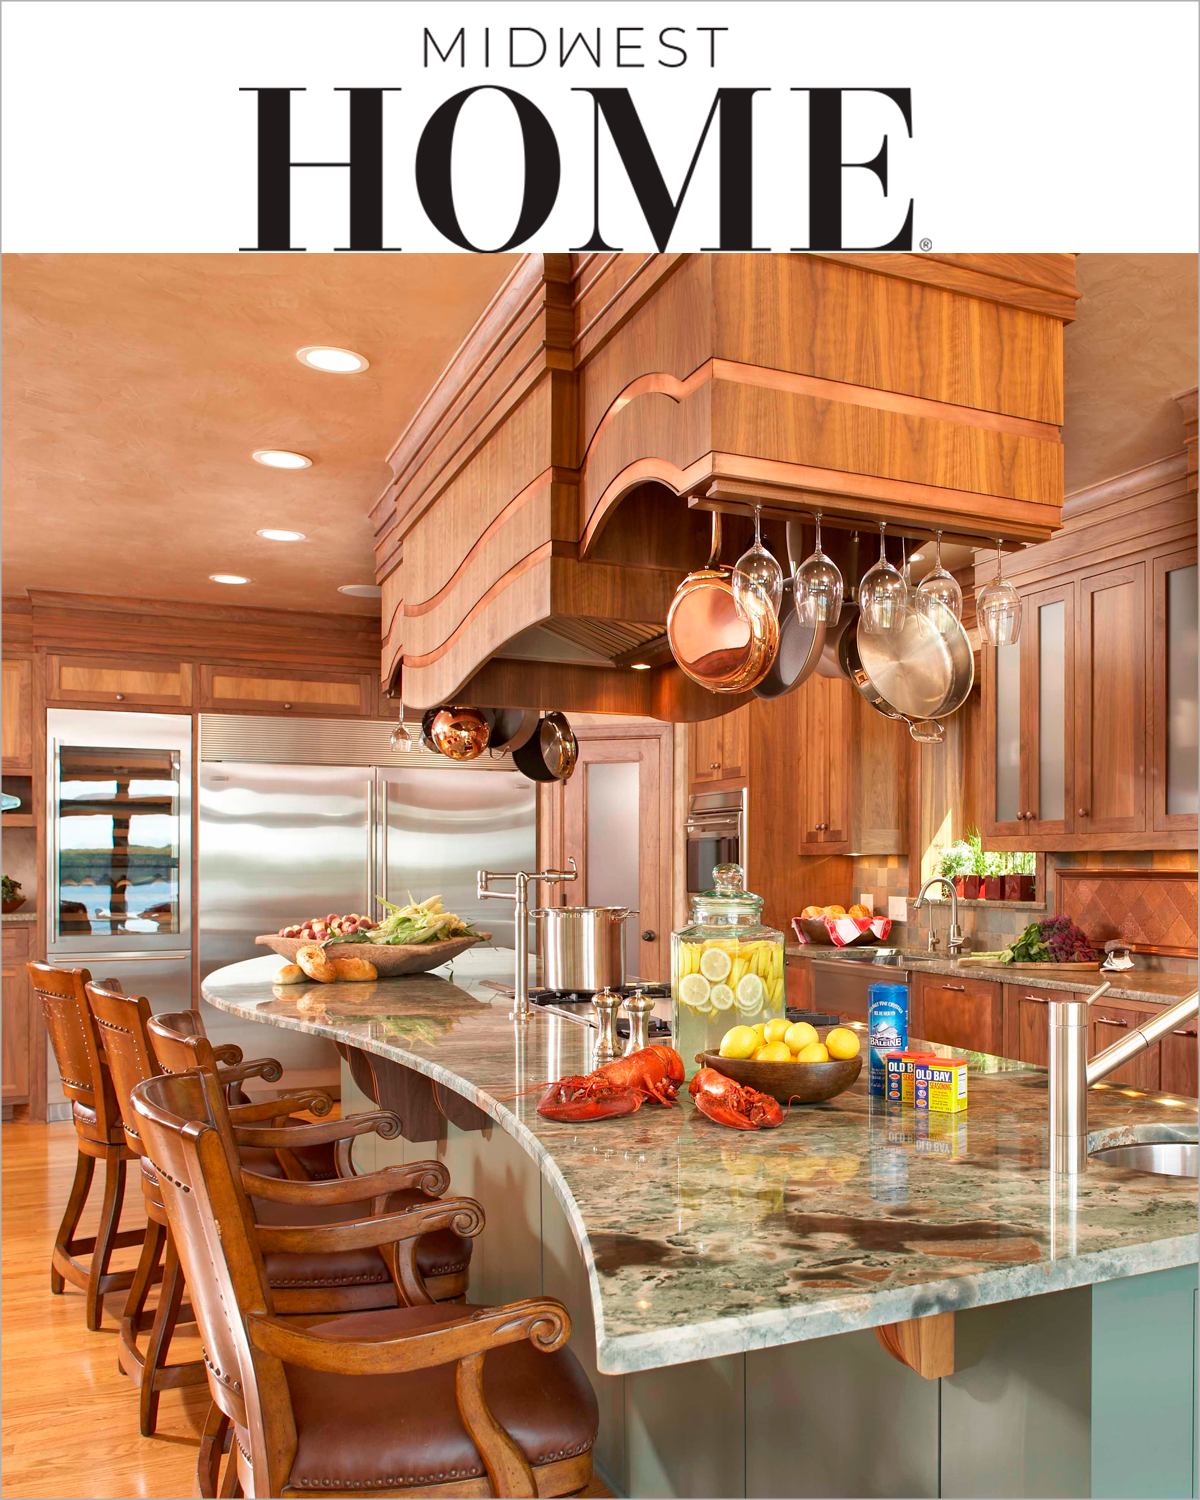 LiLu Interiors featured in Midwest Home magazine 2014